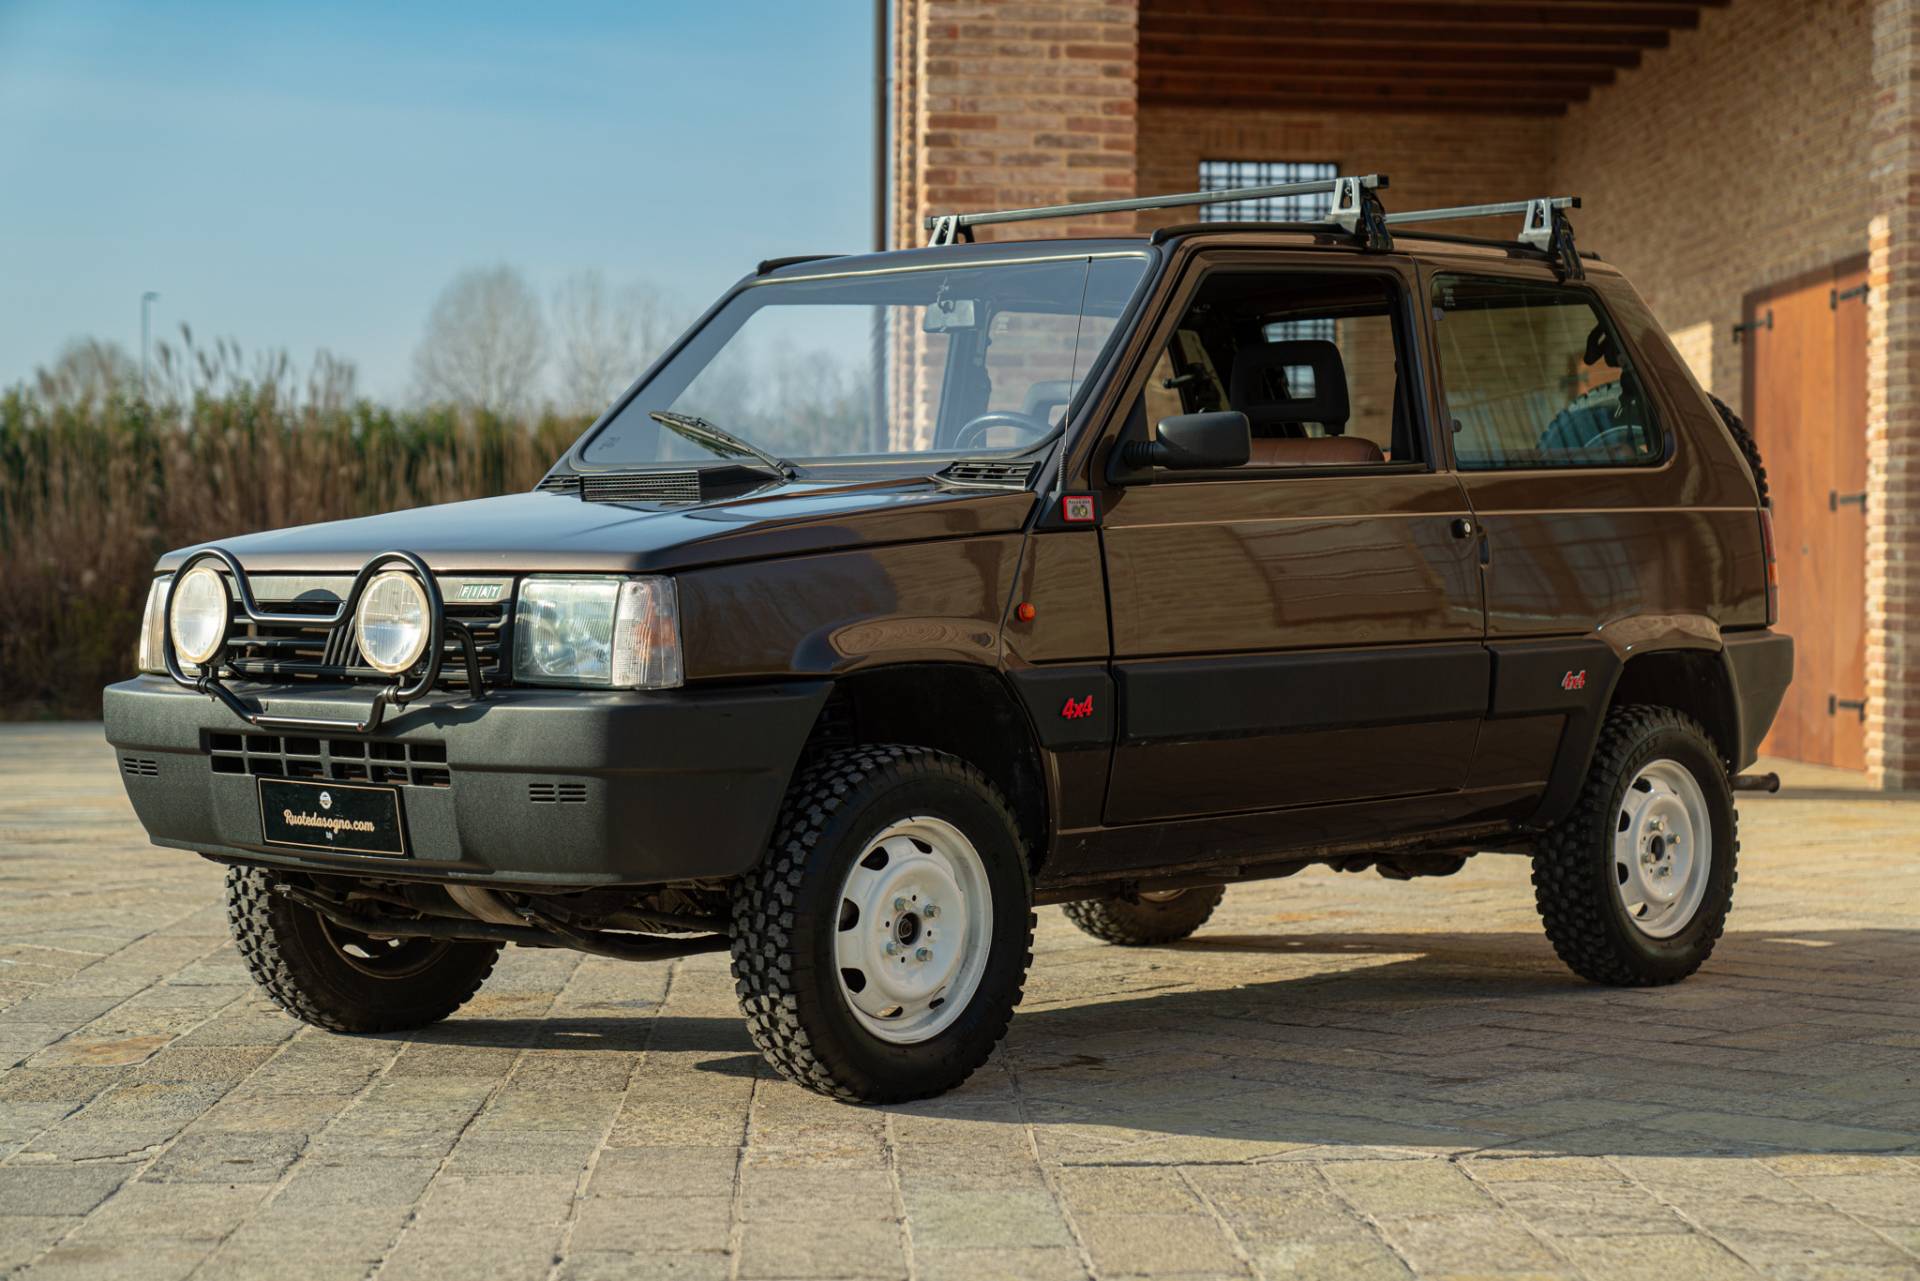 FIAT Panda Classic Cars for Sale - Classic Trader